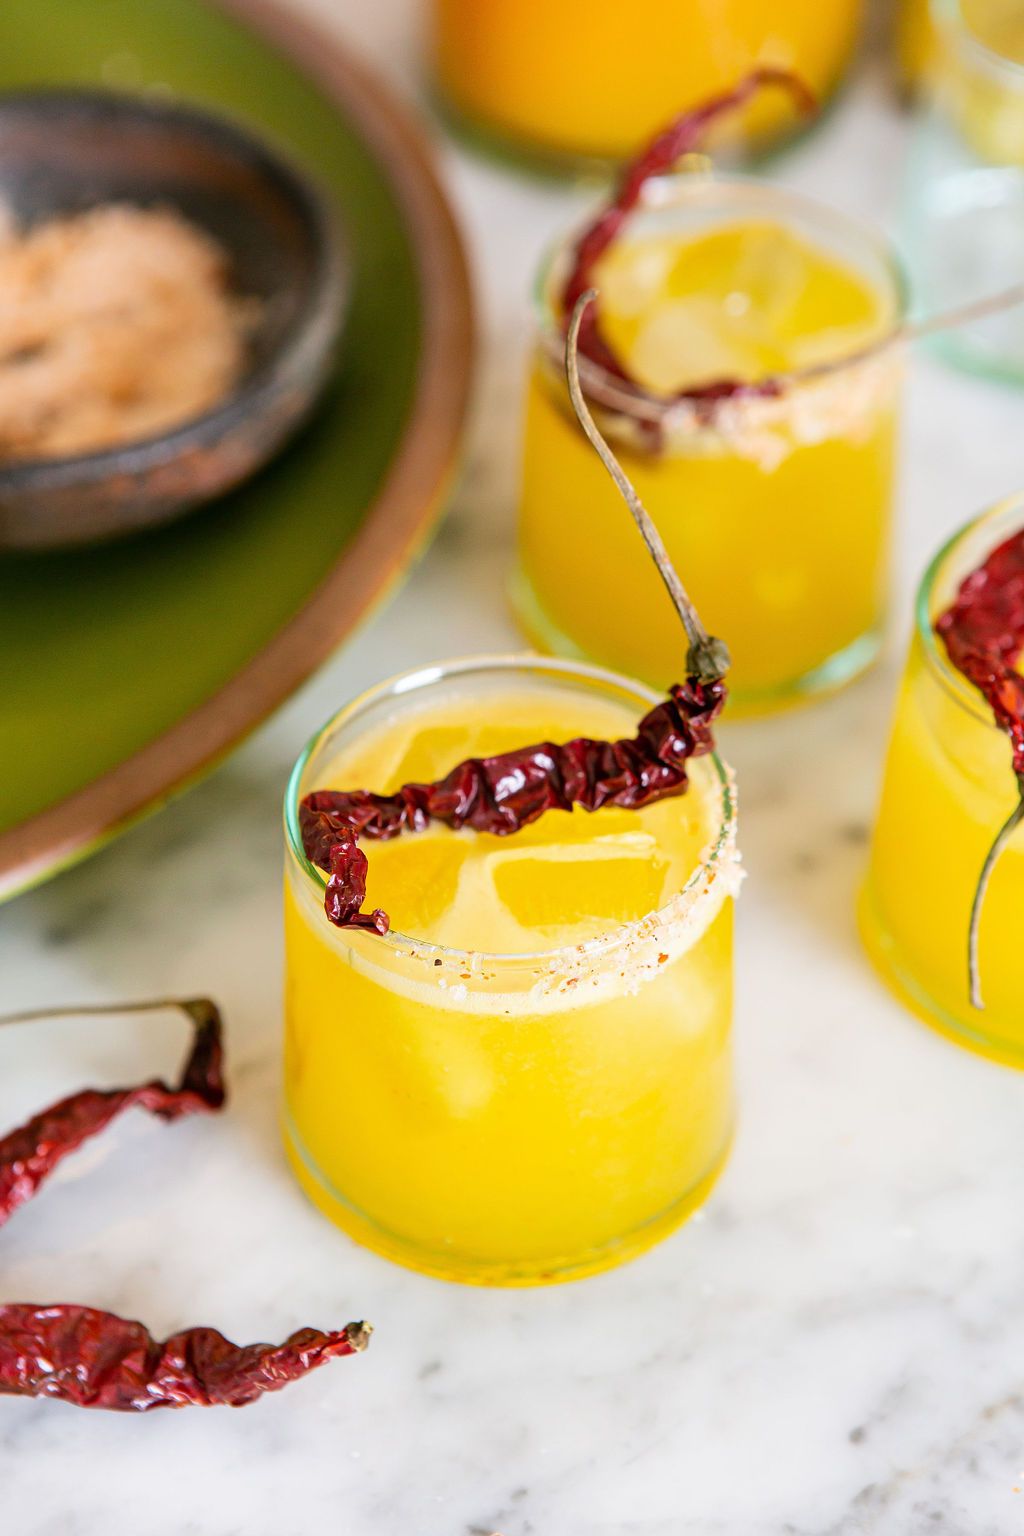 Saffron-infused cocktails topped with dried red chiles and rimmed with salt.